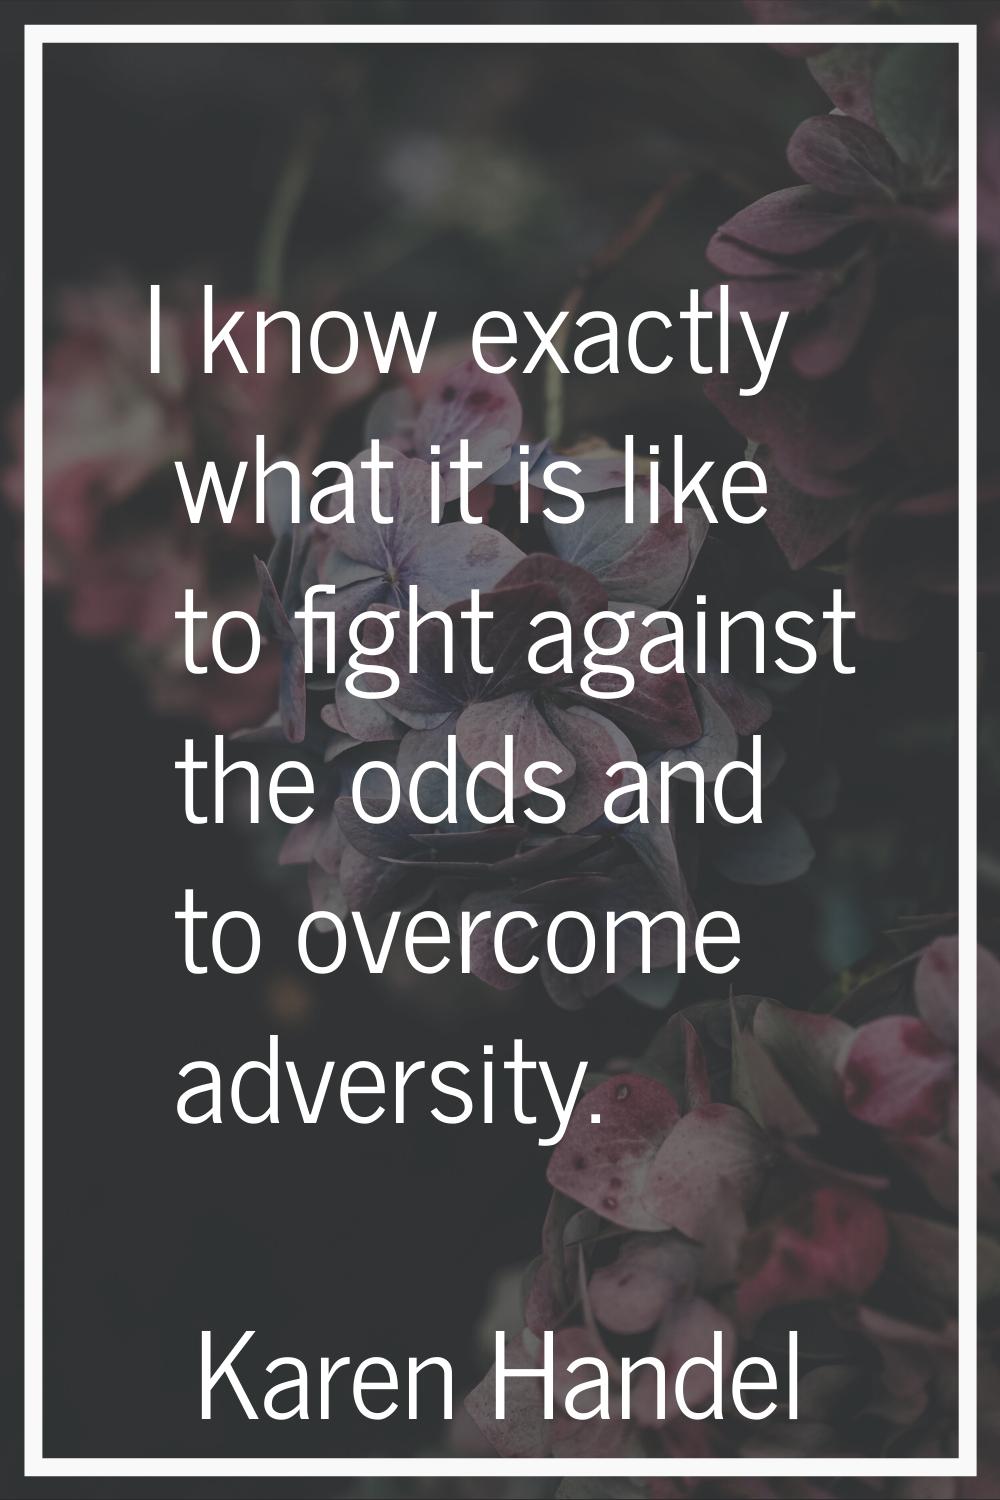 I know exactly what it is like to fight against the odds and to overcome adversity.